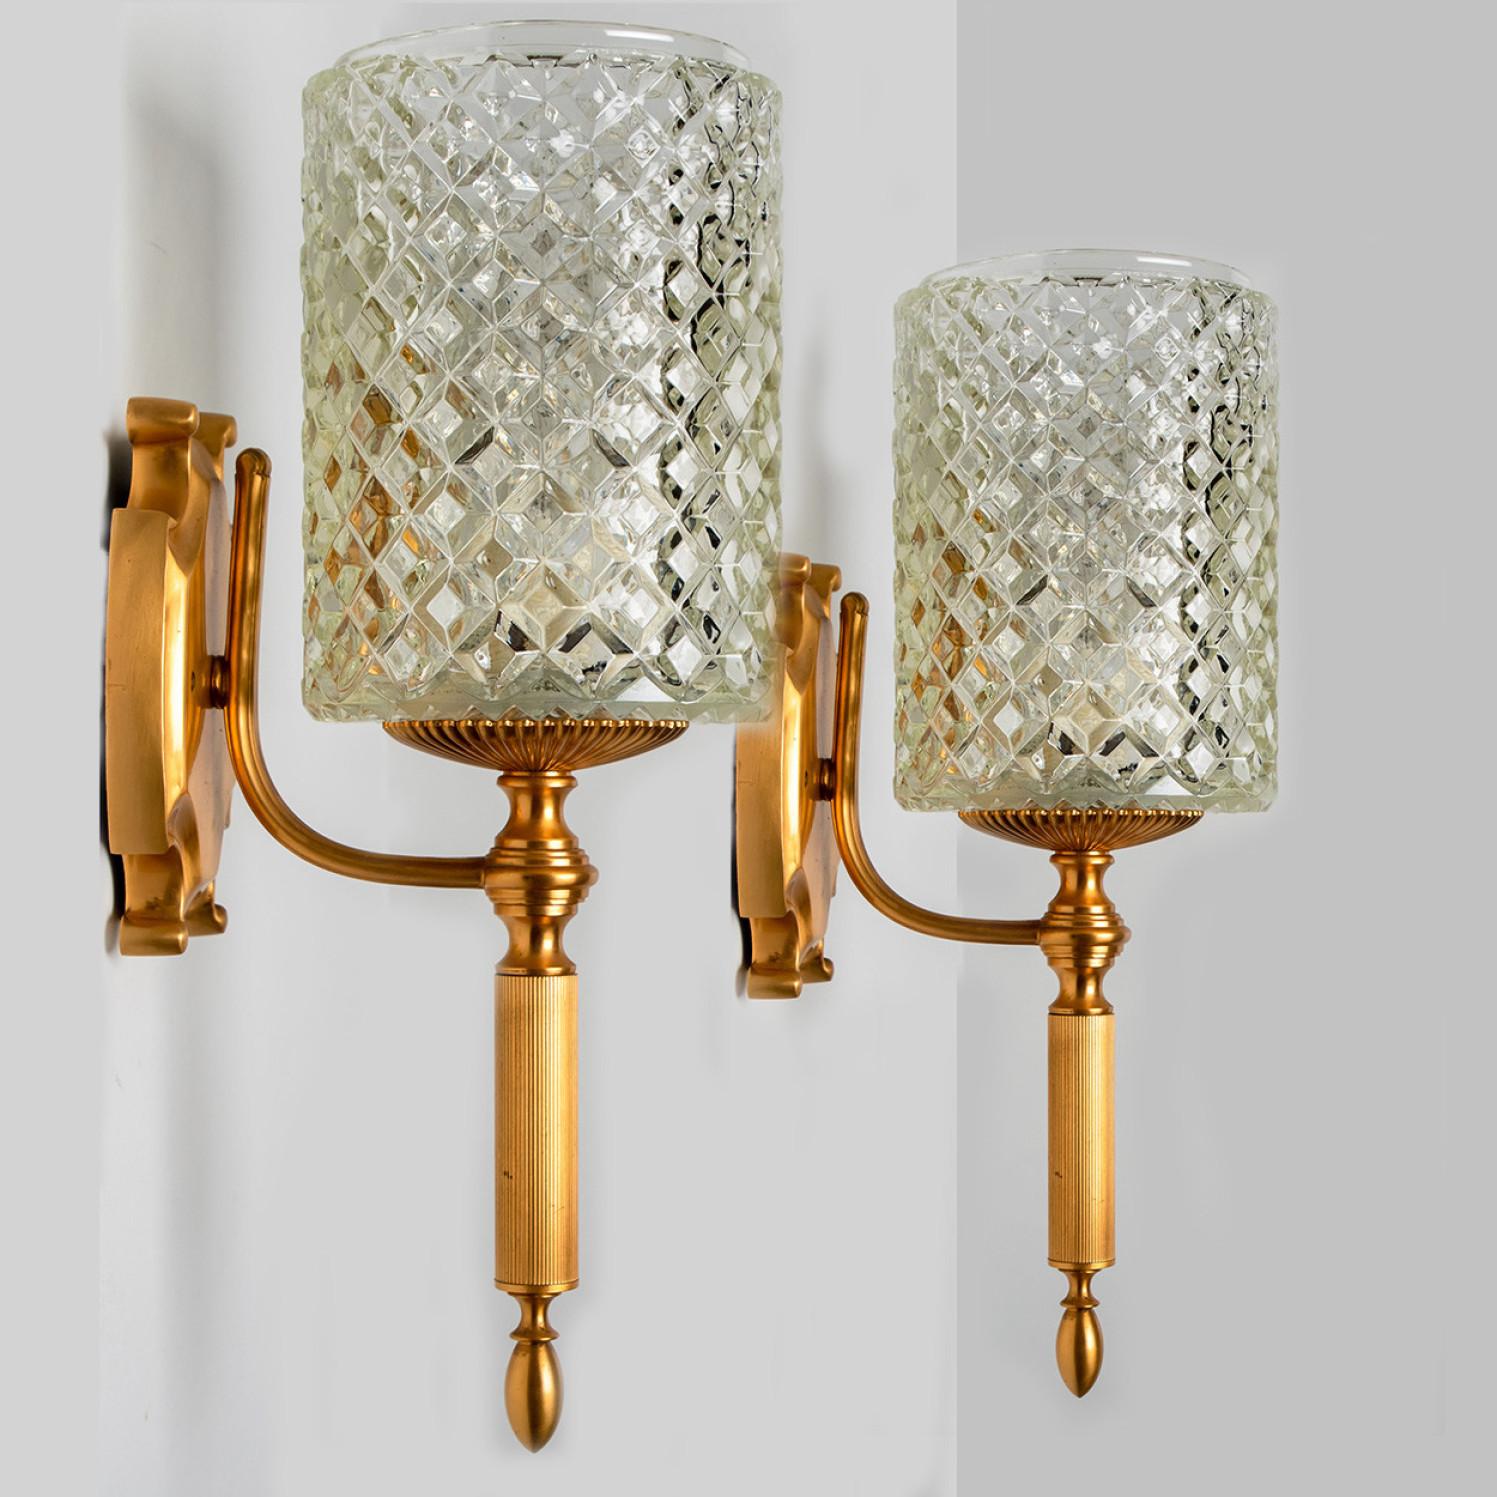 Textured Glass and Brass Wall Lights, Germany, 1960s For Sale 6